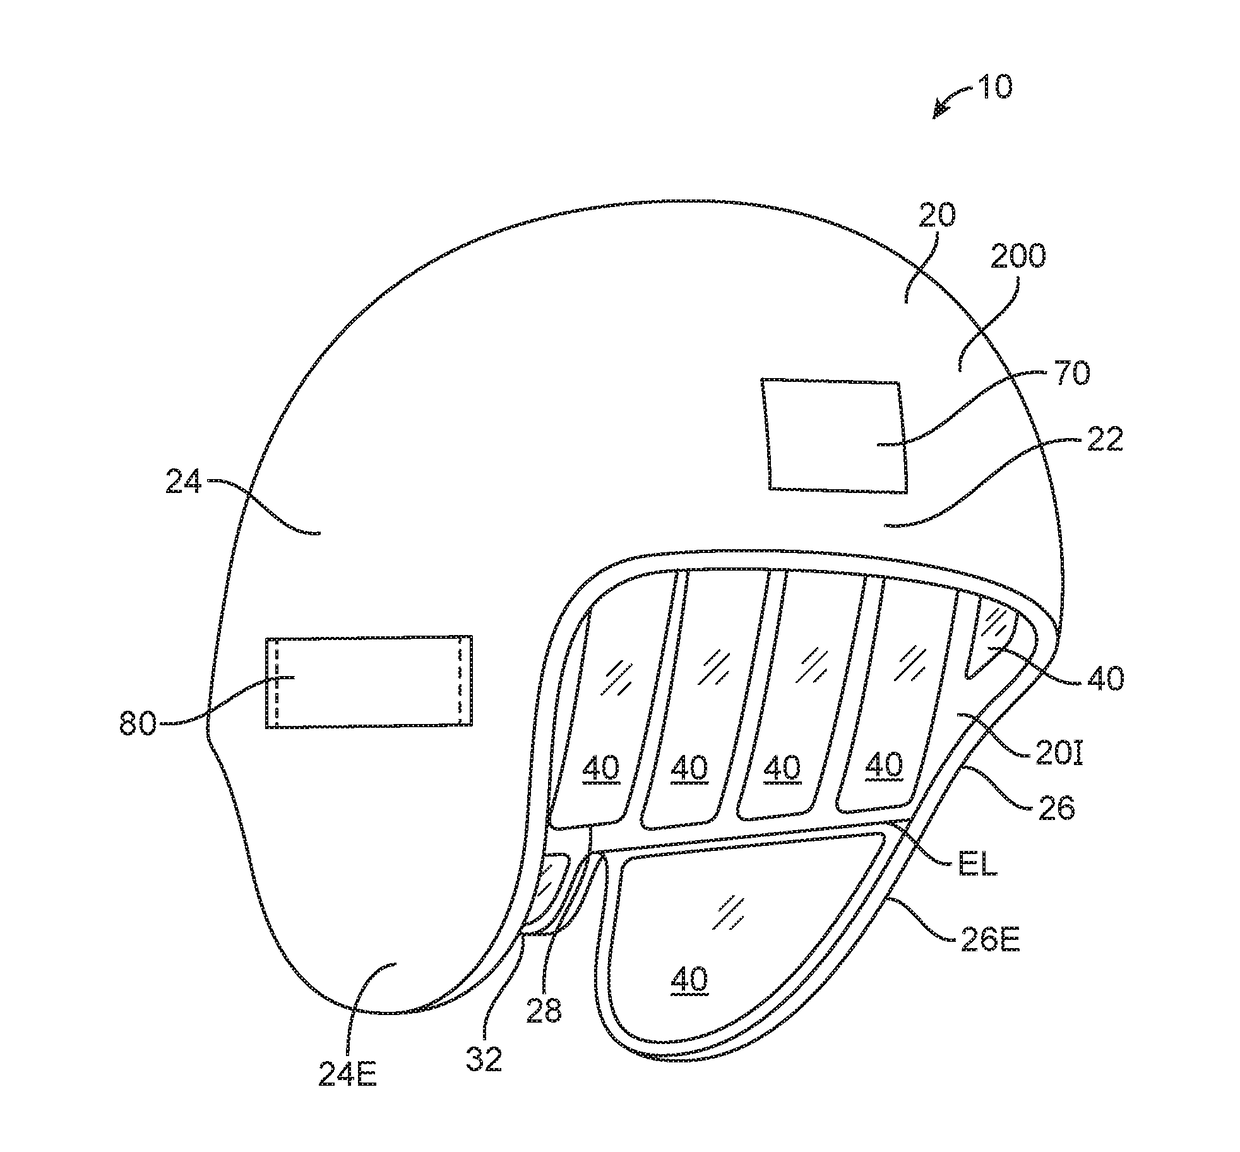 Portable rapid cooling, hypothermia inducing headgear apparatus for tissue preservation